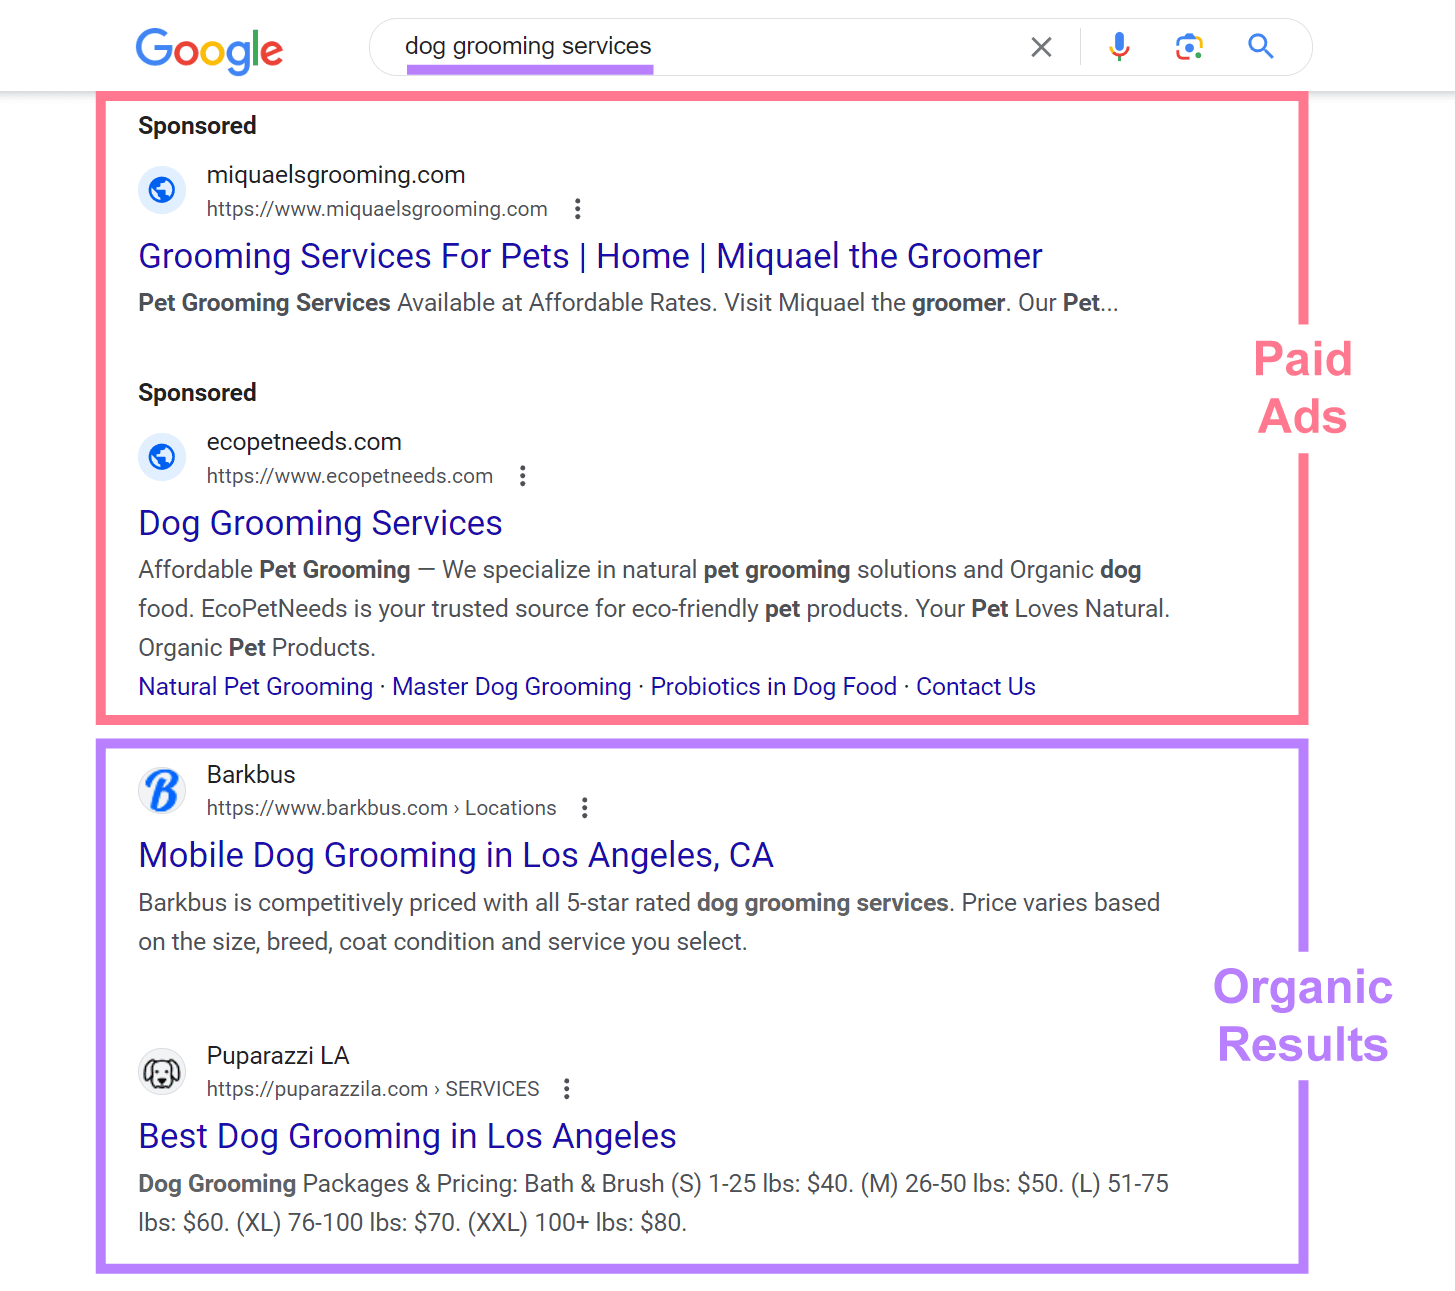 Paid ads and integrated  results connected  Google SERP for "dog grooming services" query